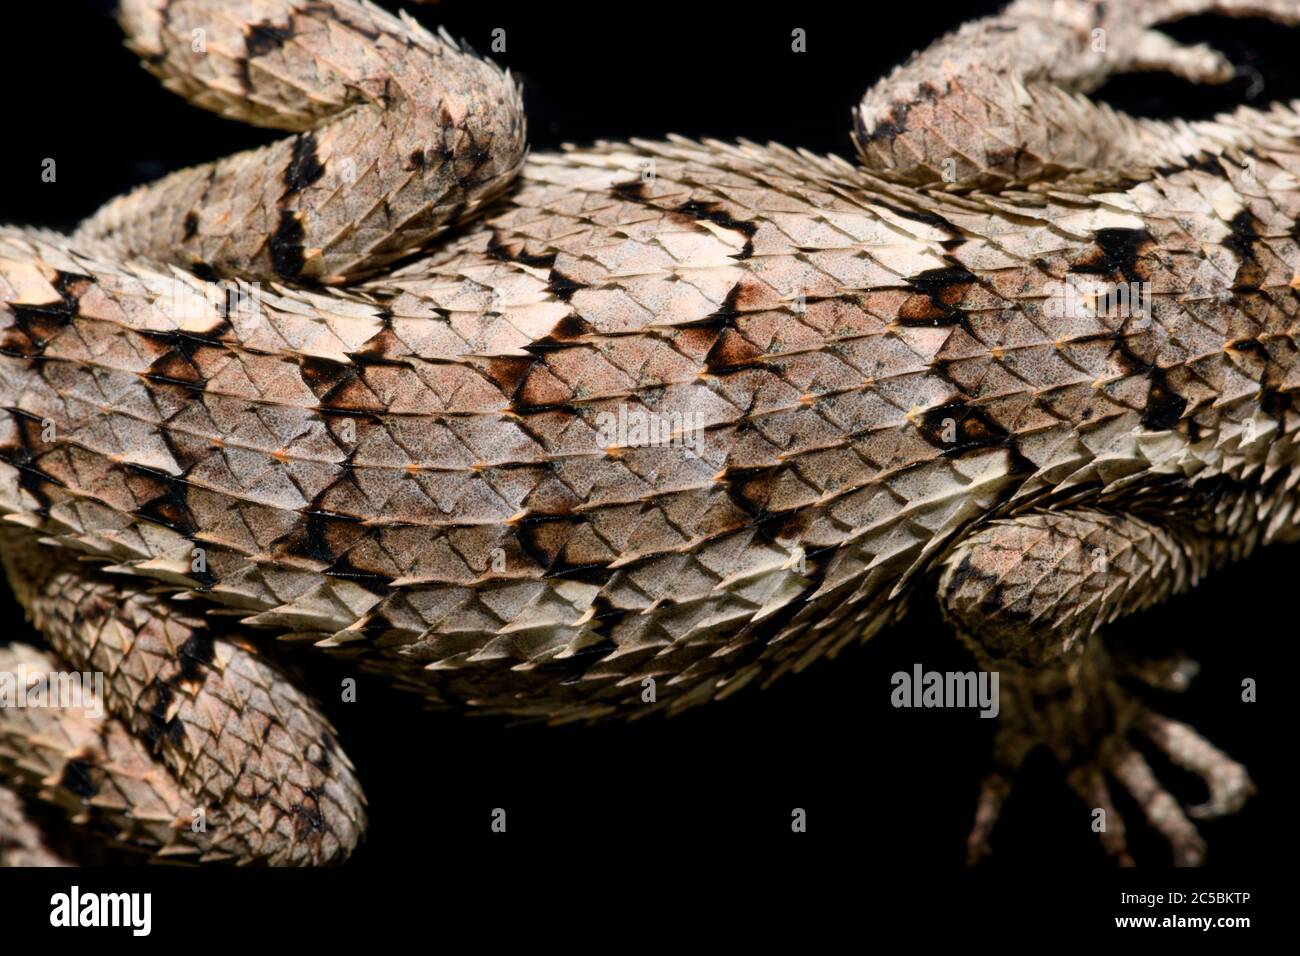 Texas spiny lizard (Sceloporus olivaceus) On black close-up top view of scales Stock Photo